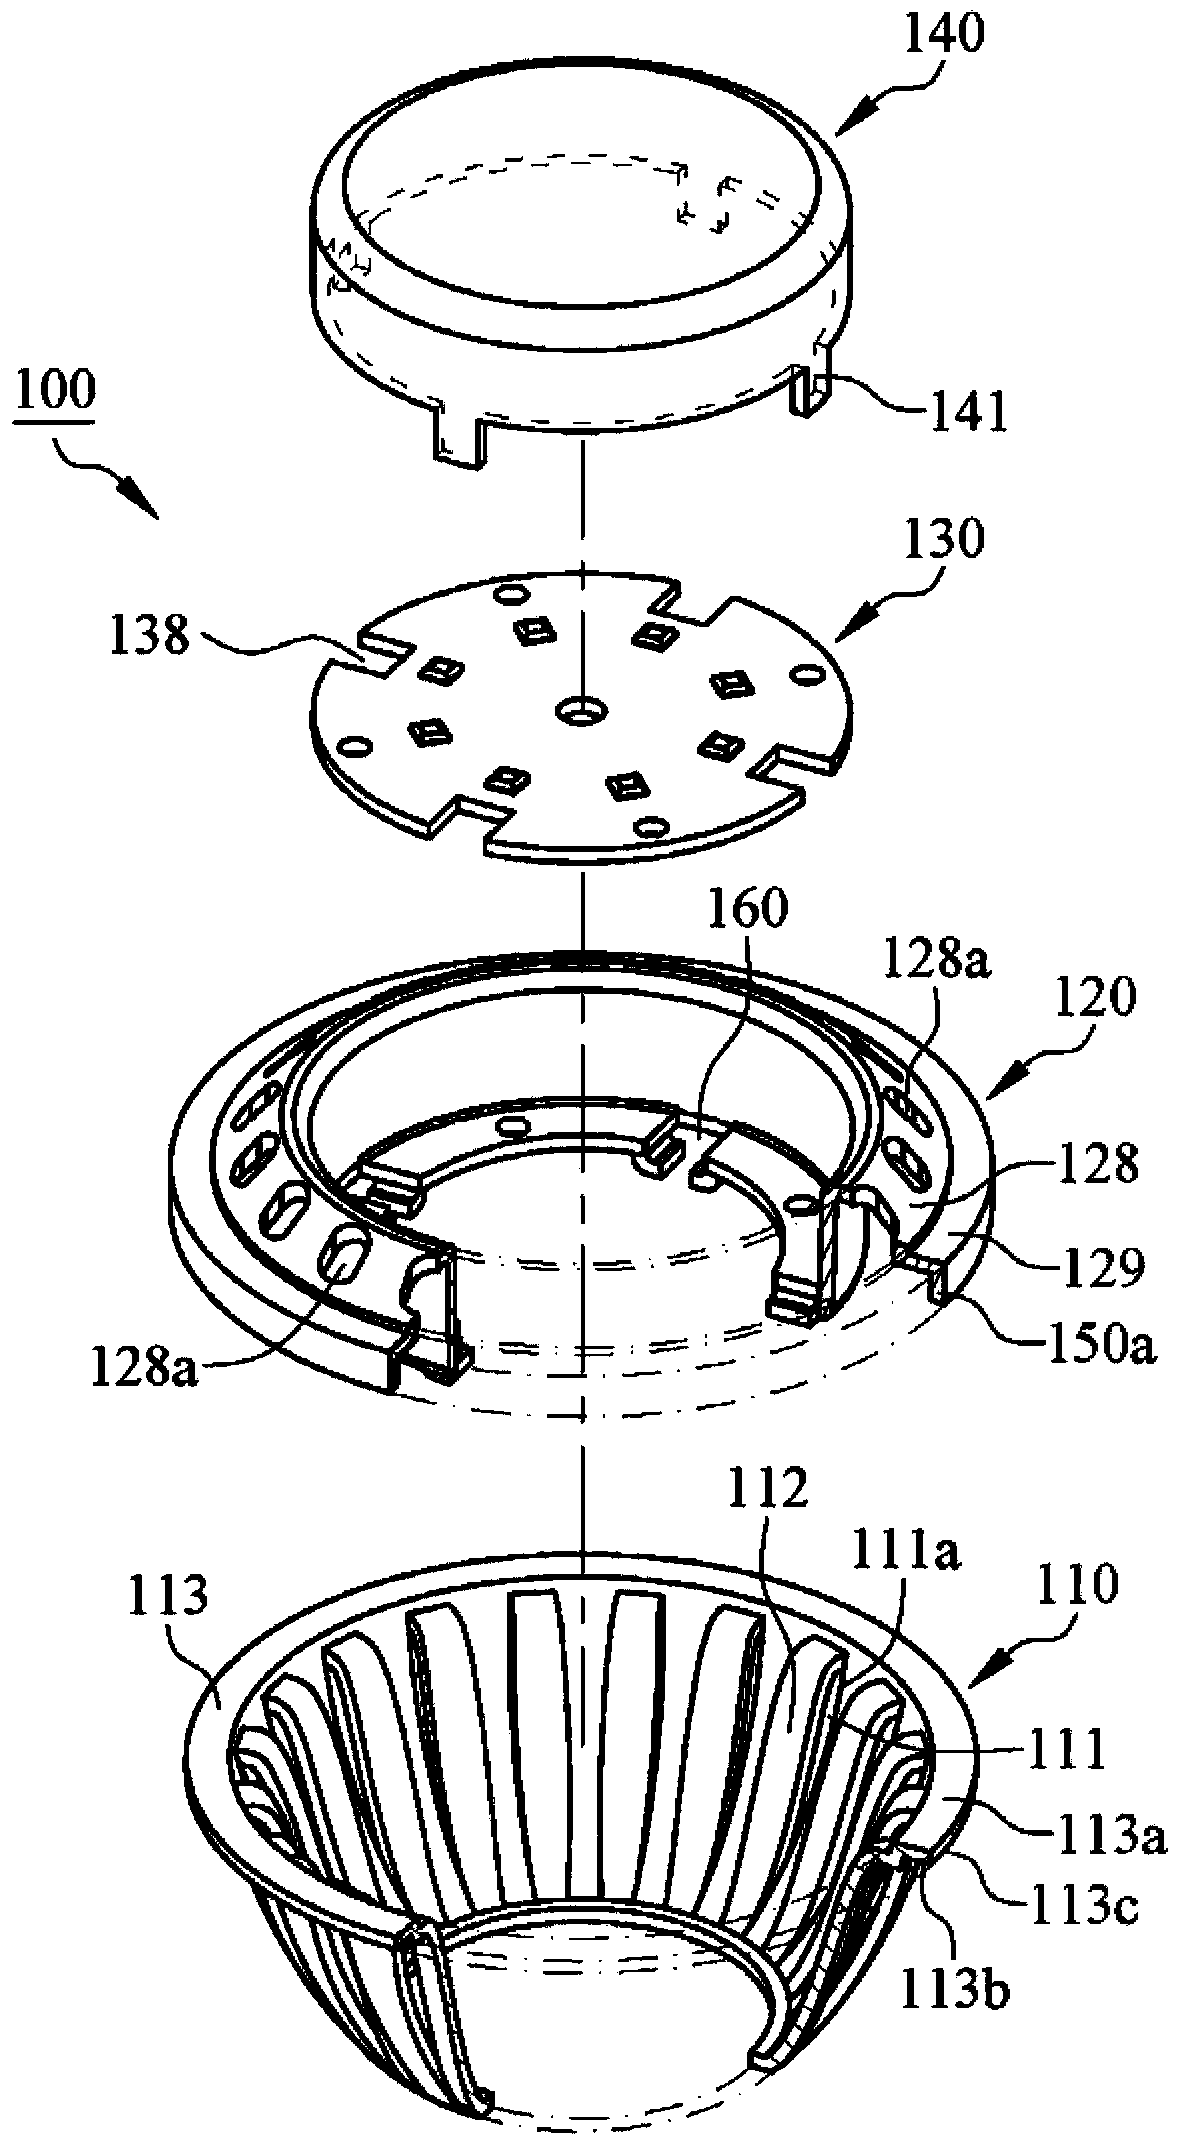 Mounting structure of a lamp assembly